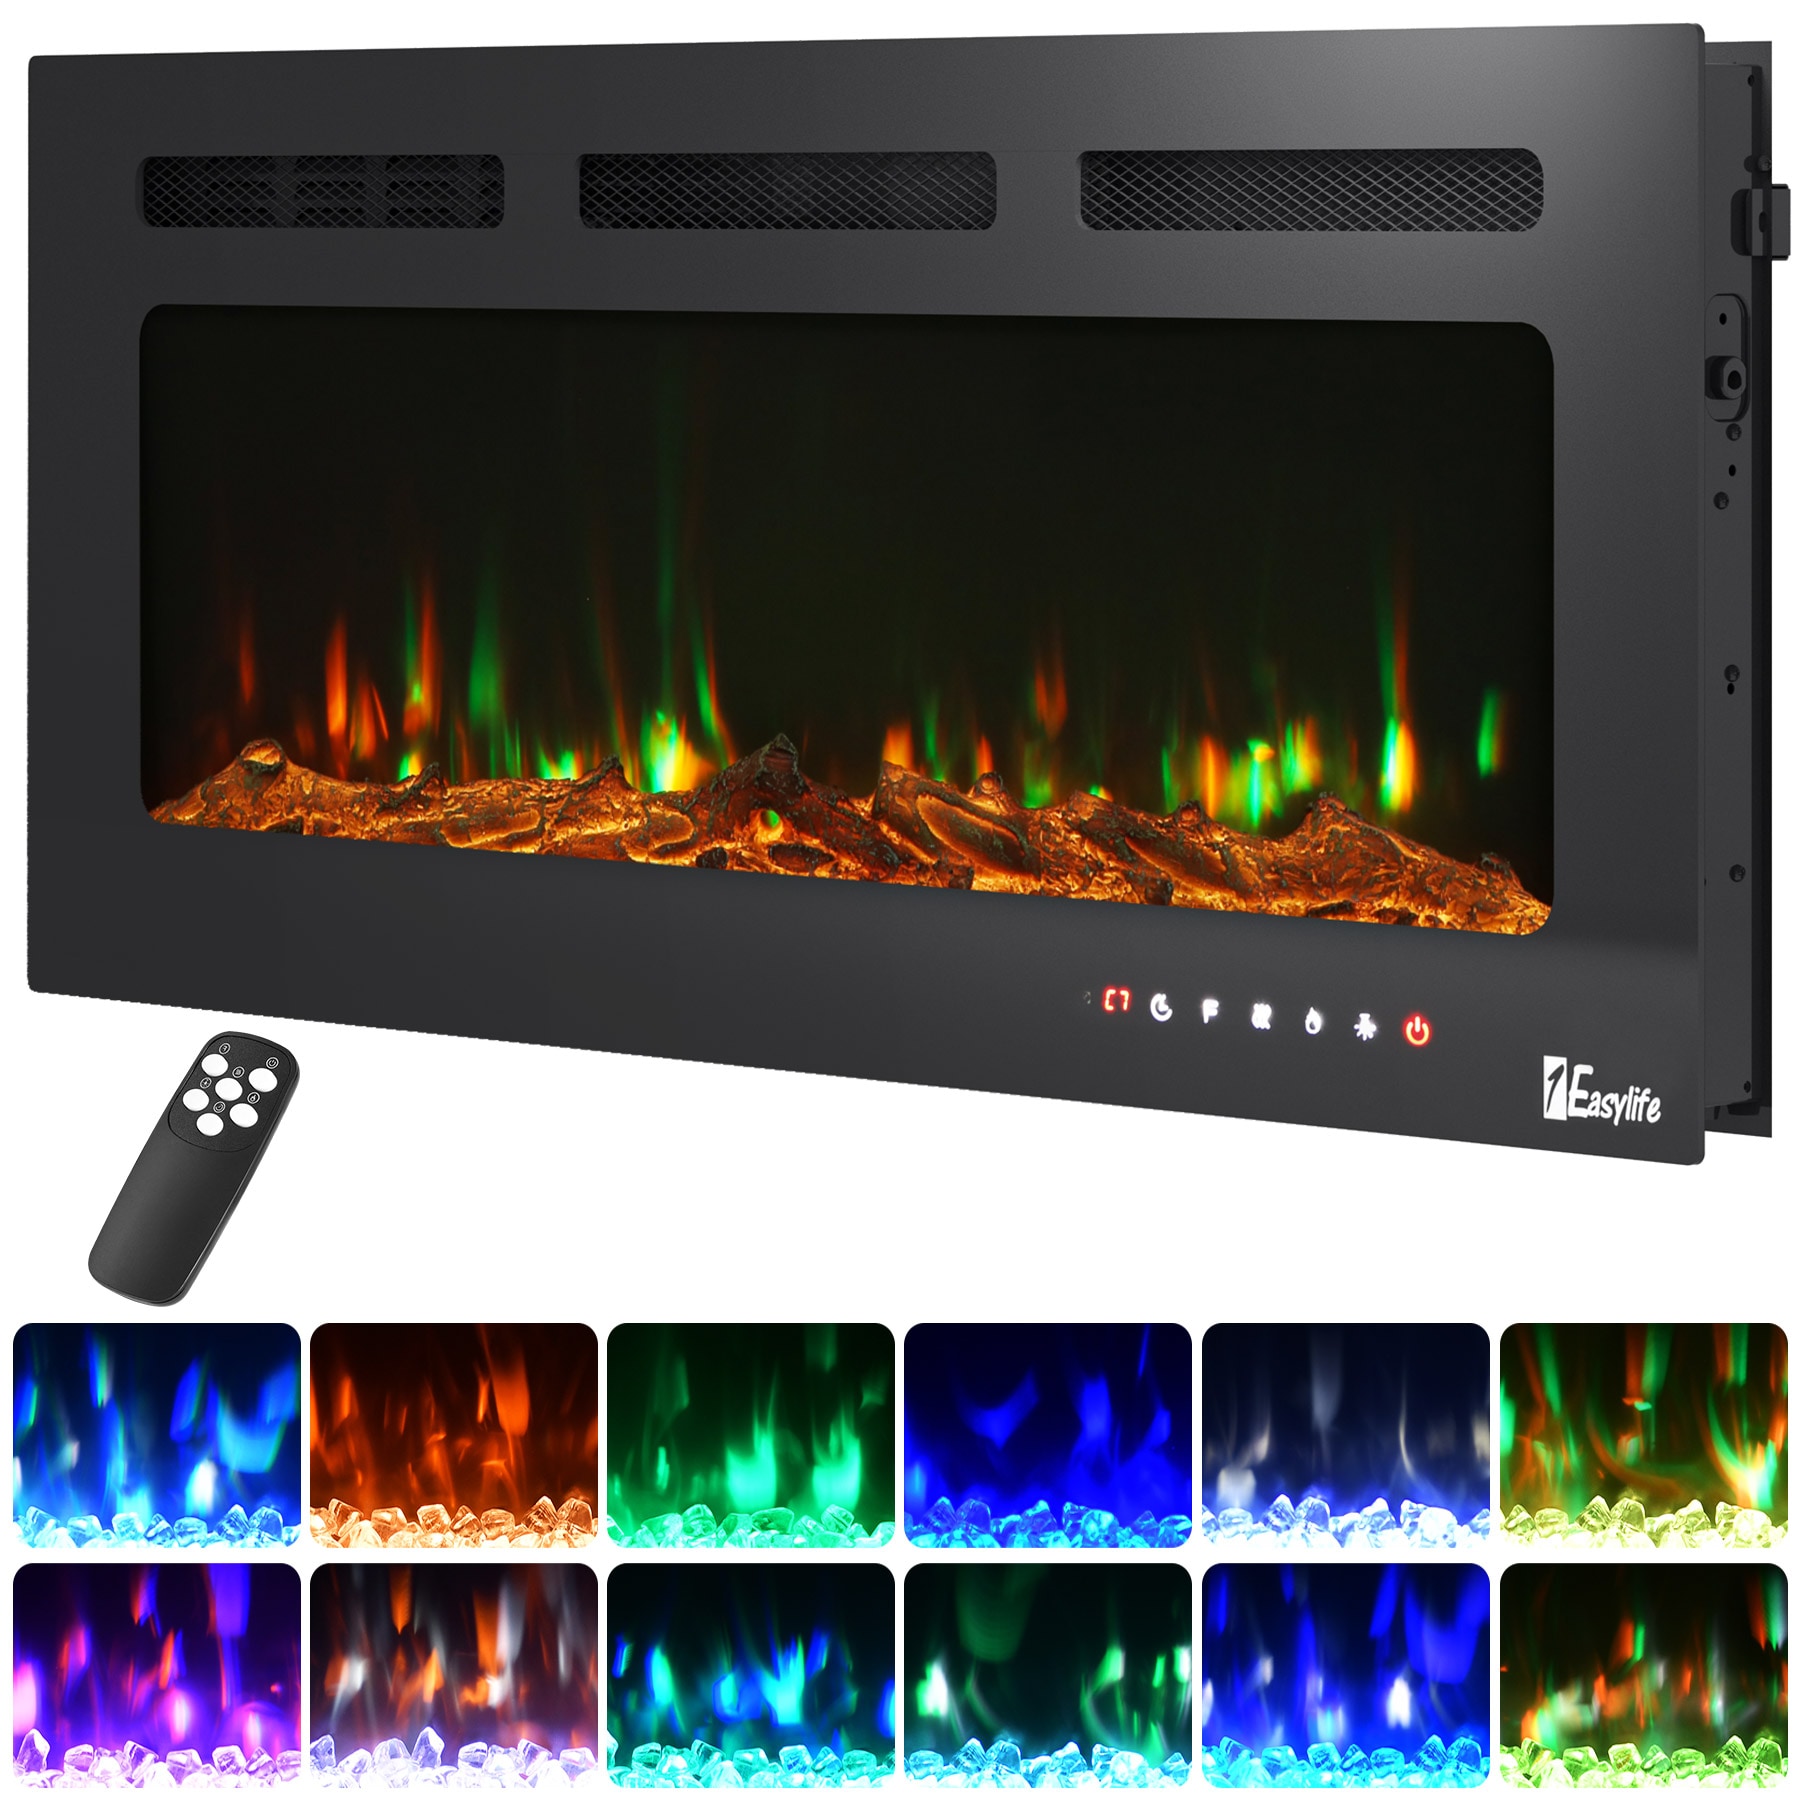 Infrared Heater Zone Heat Candle Electric Fireplace Insert Brindle Flame 20 in 